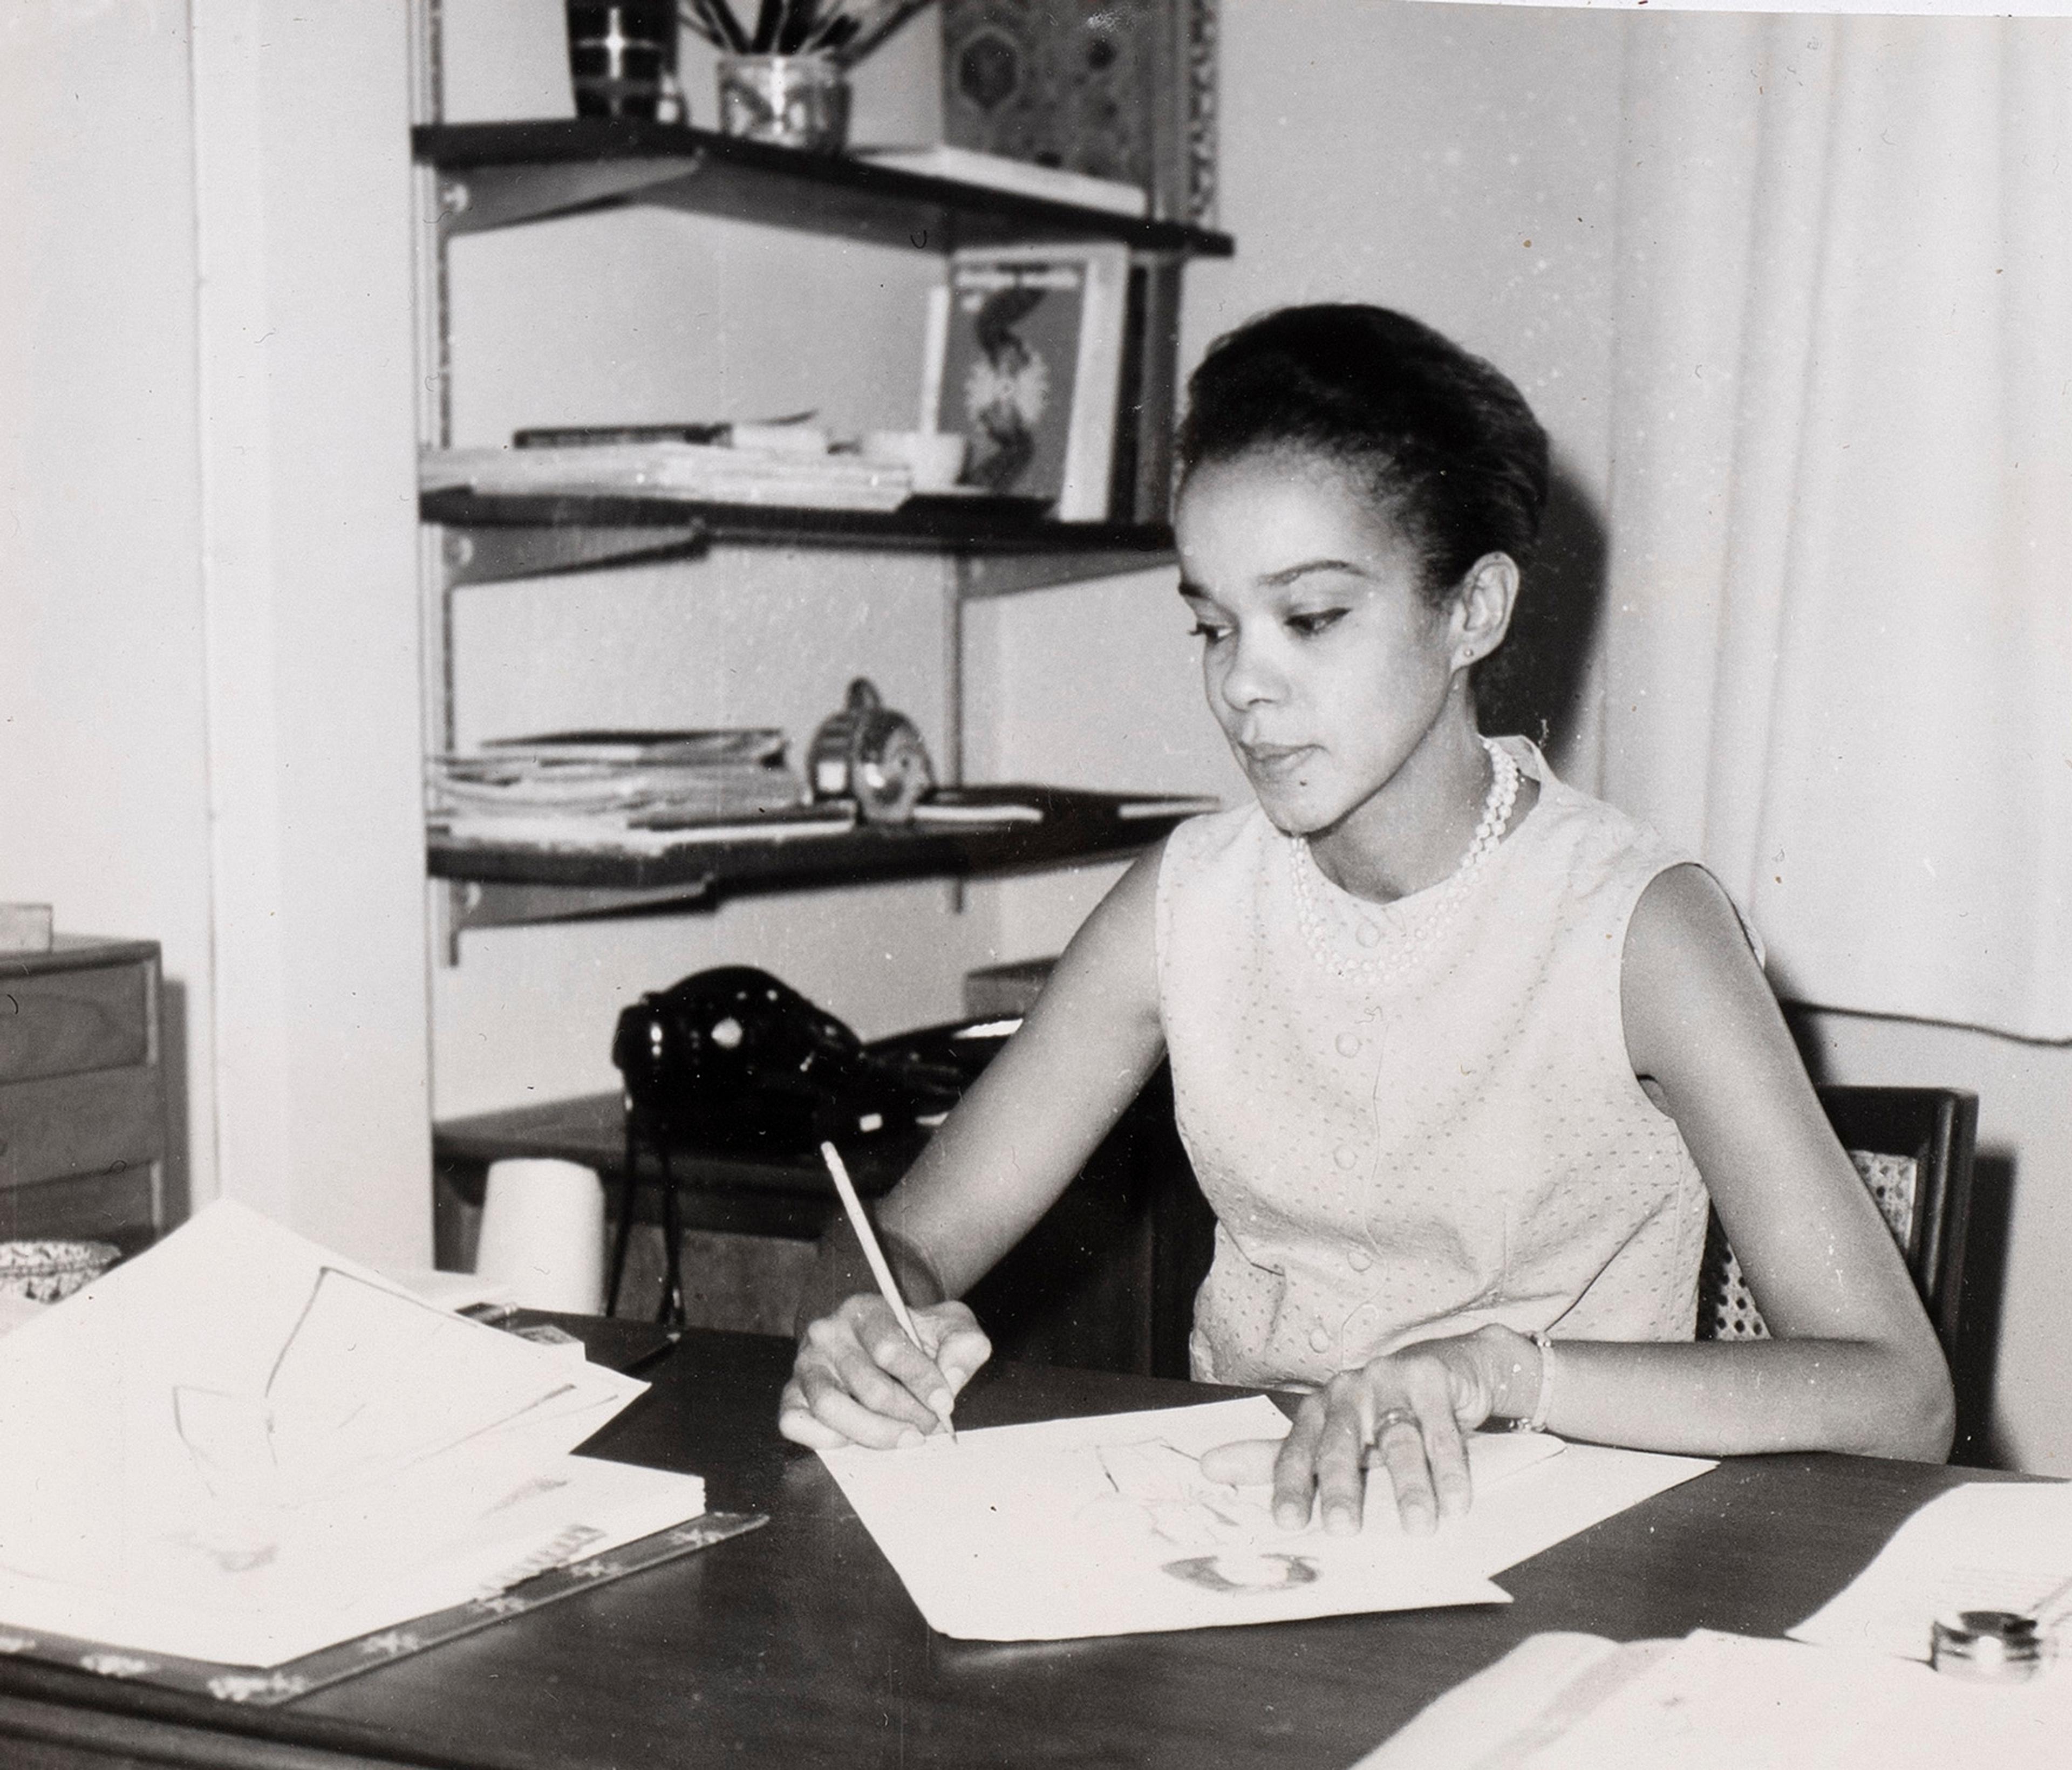 Black and white photograph of a young Black woman with her hair up, drawing at a desk